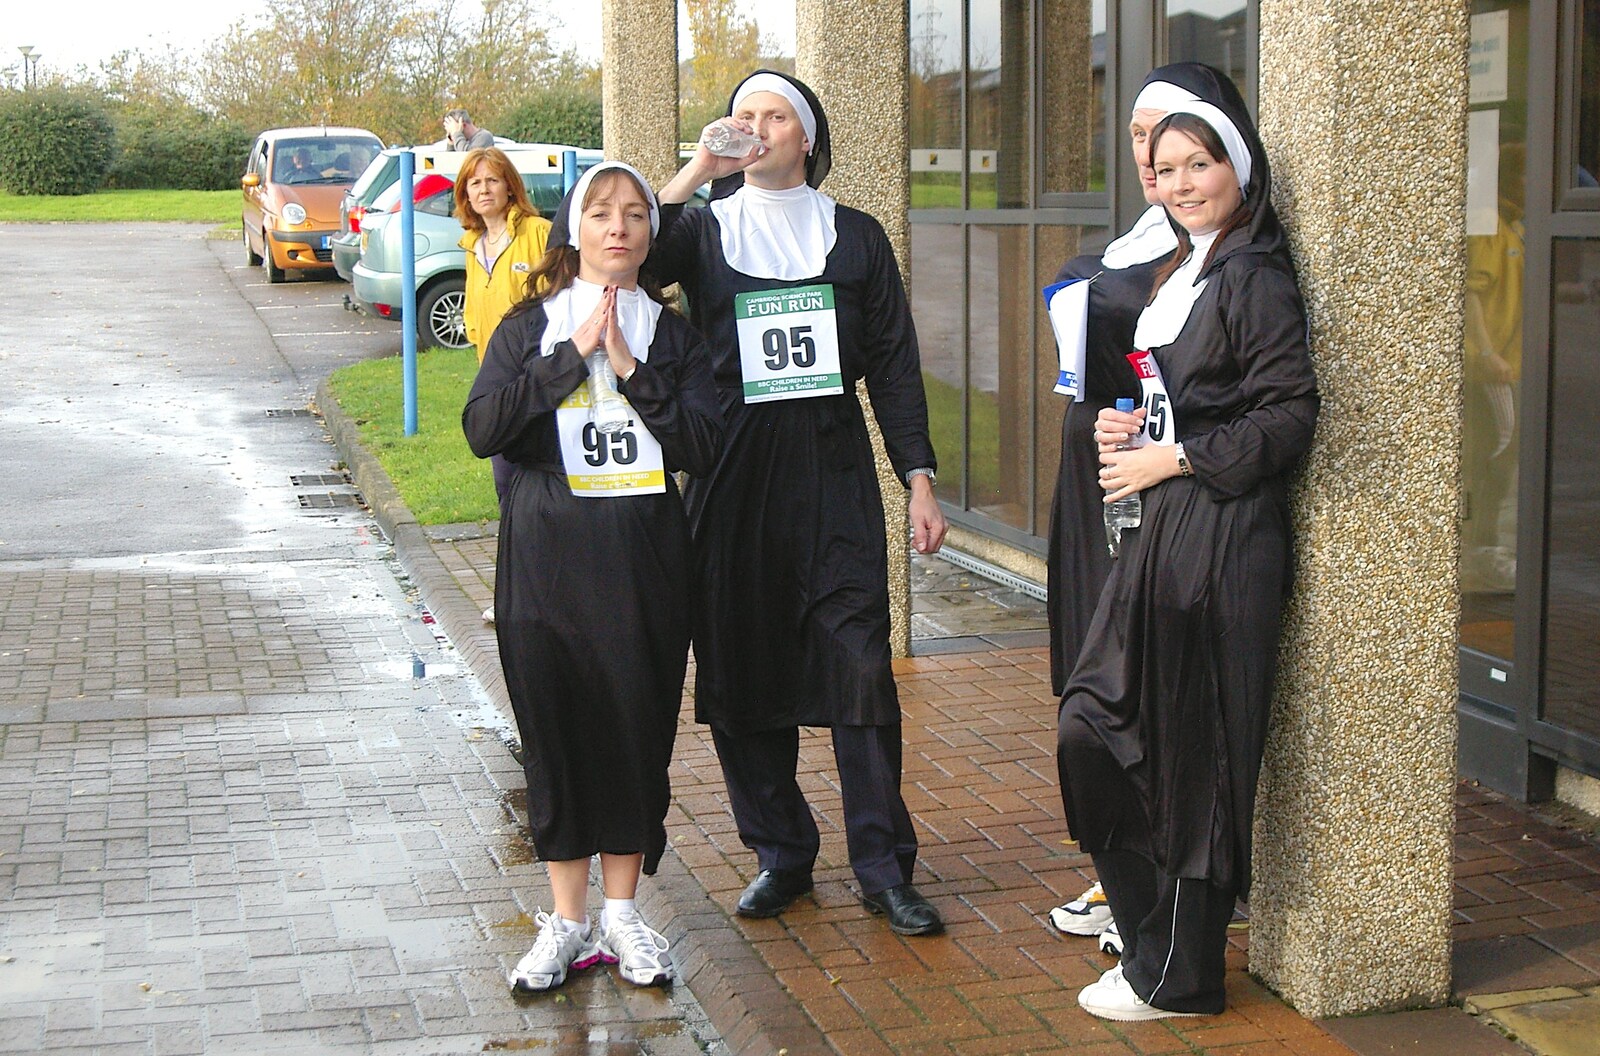 The nuns have finished their lap from Cambridge Science Park "Children in Need" Fun Run, Milton Road, Cambridge - 17th November 2006